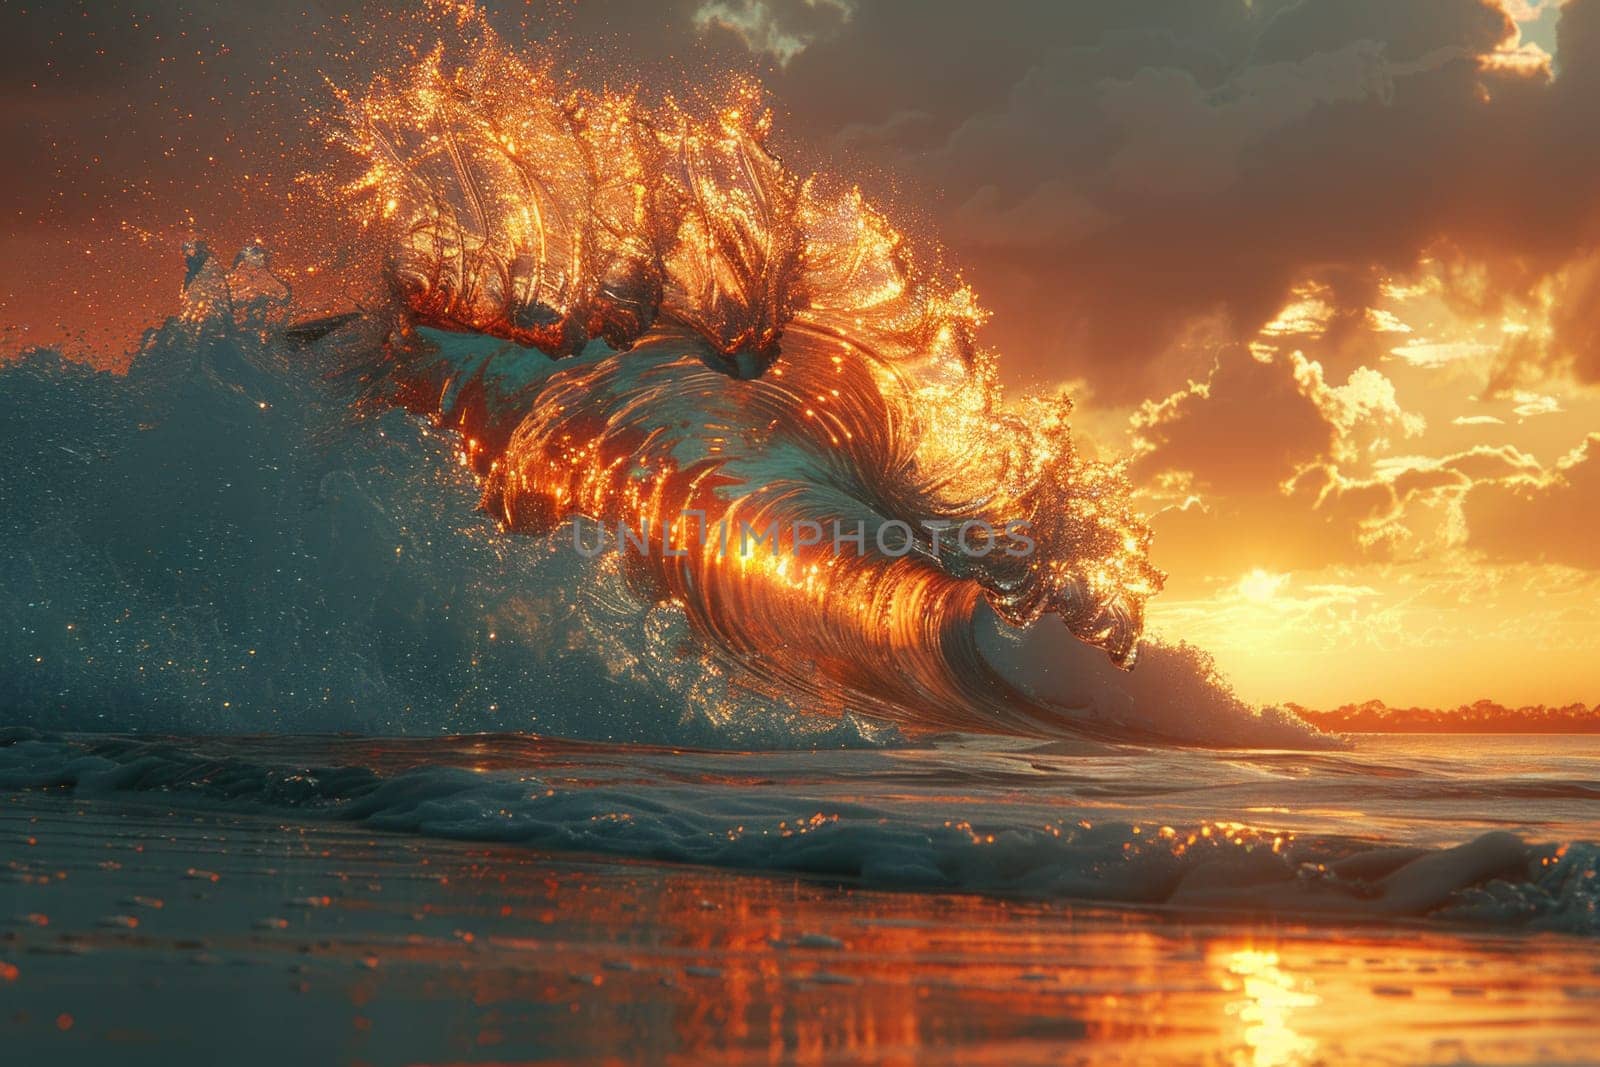 A breathtaking scene unfolds as a colossal wave crashes into the sandy shore under the warm hues of a setting sun, creating a mesmerizing display of power and beauty by but_photo